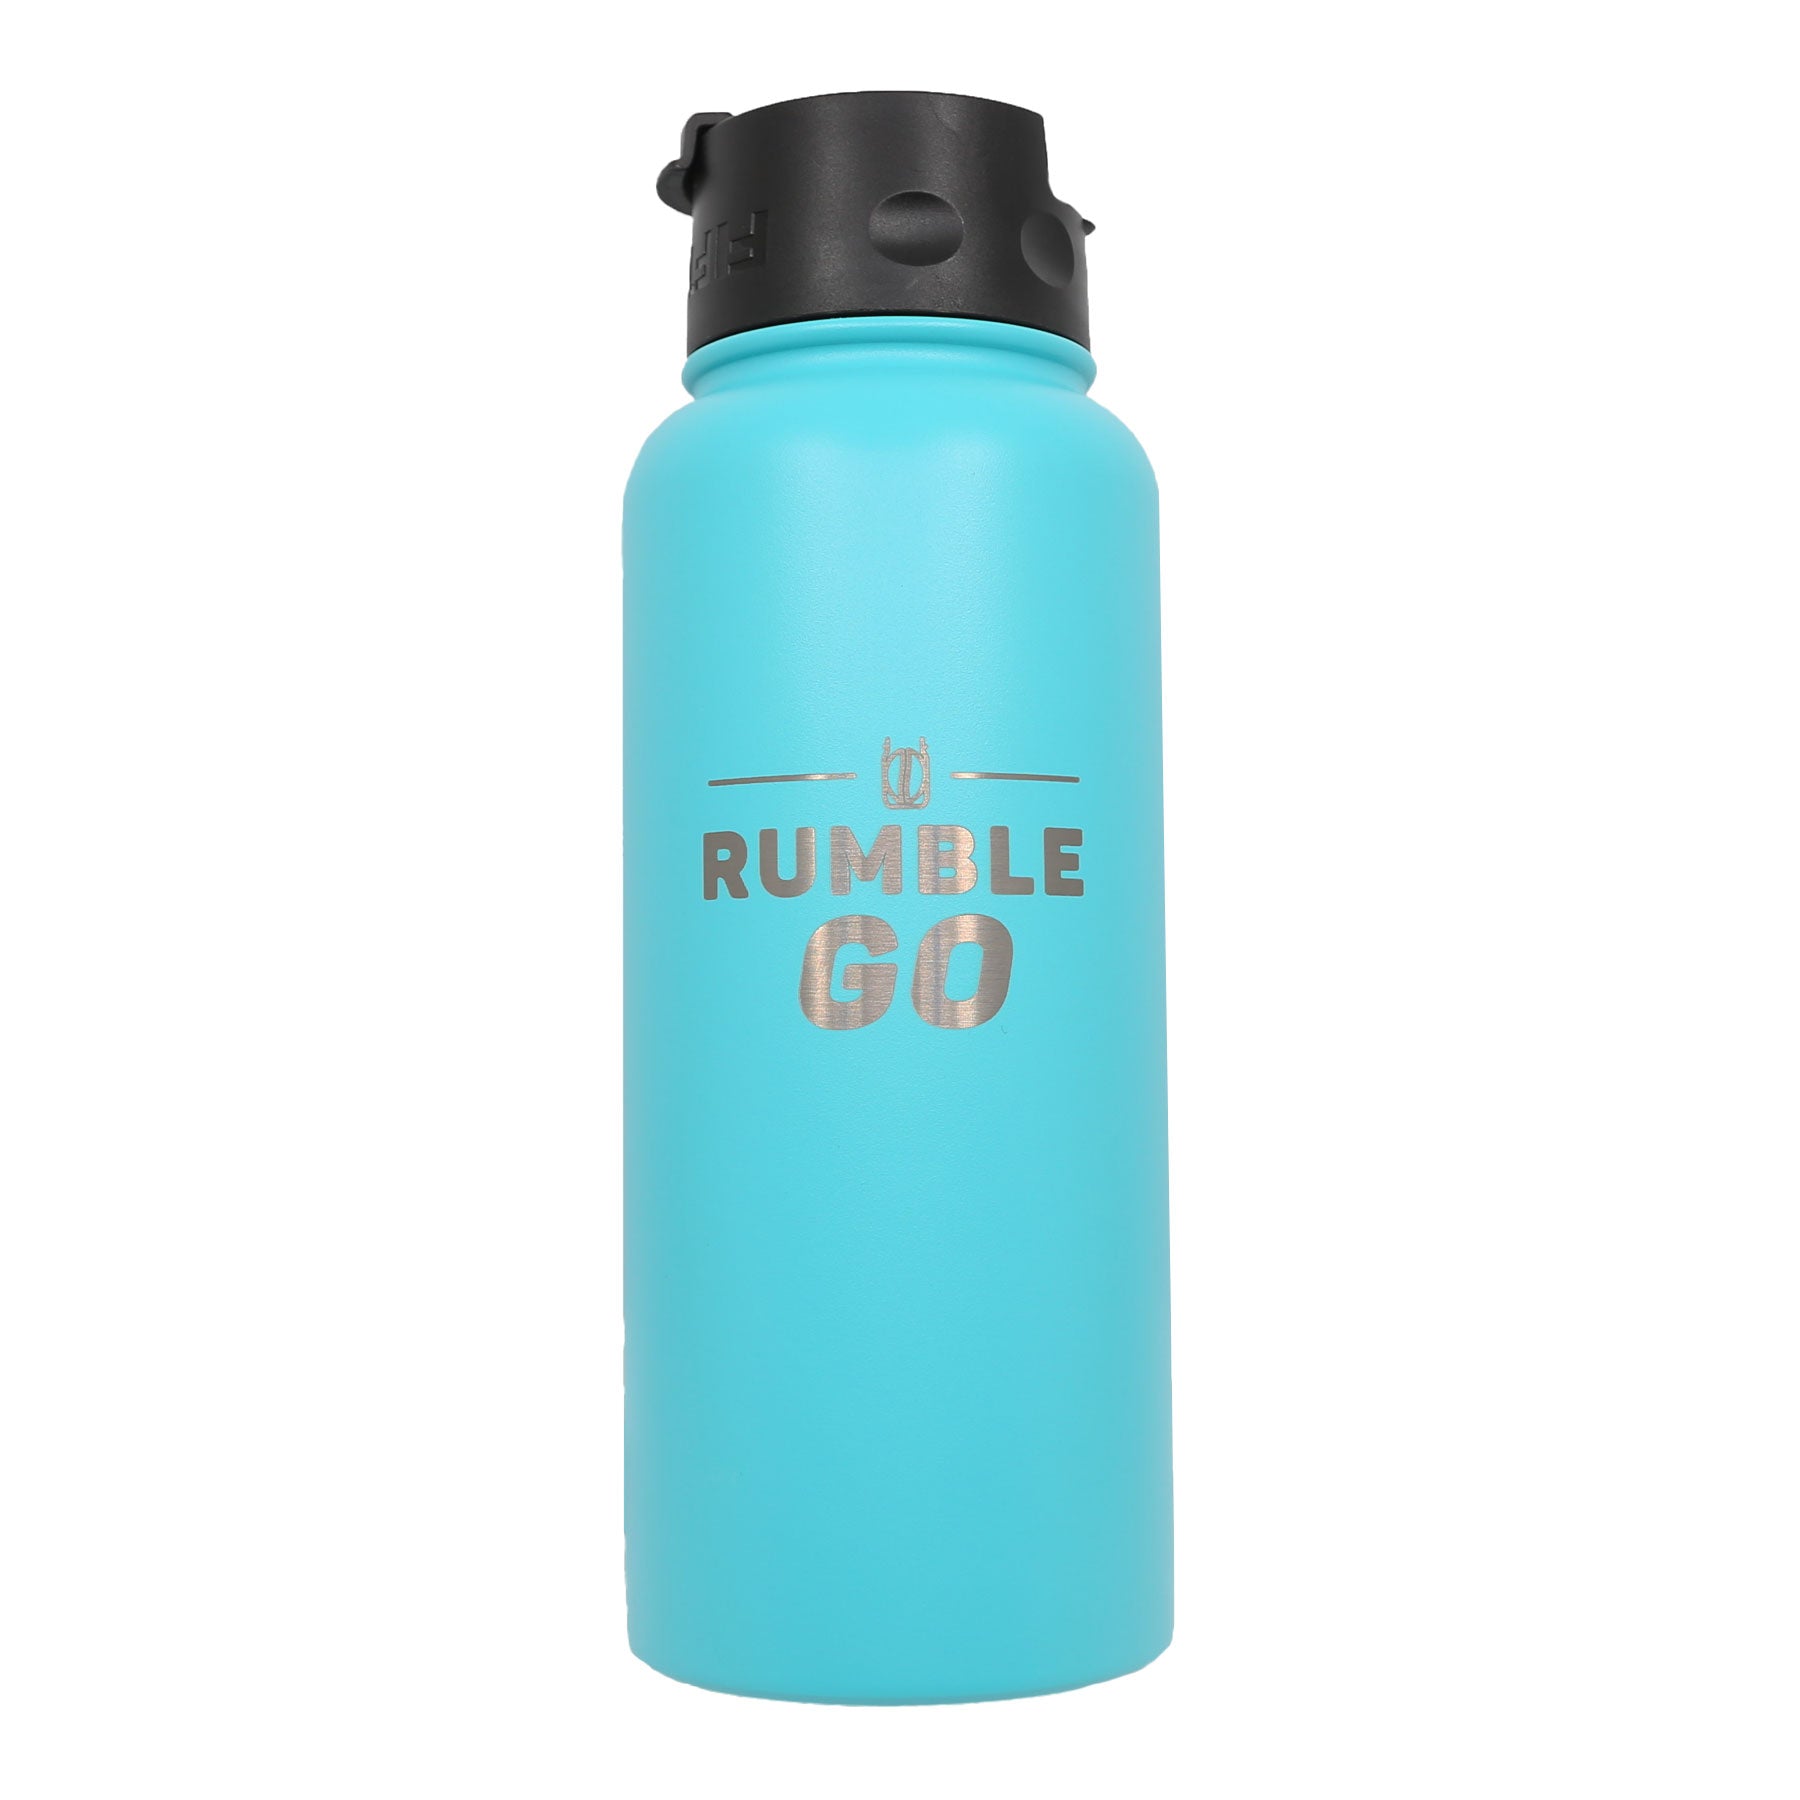 Rumble Jar Review - Cold Brew Coffee, the Easy Way 